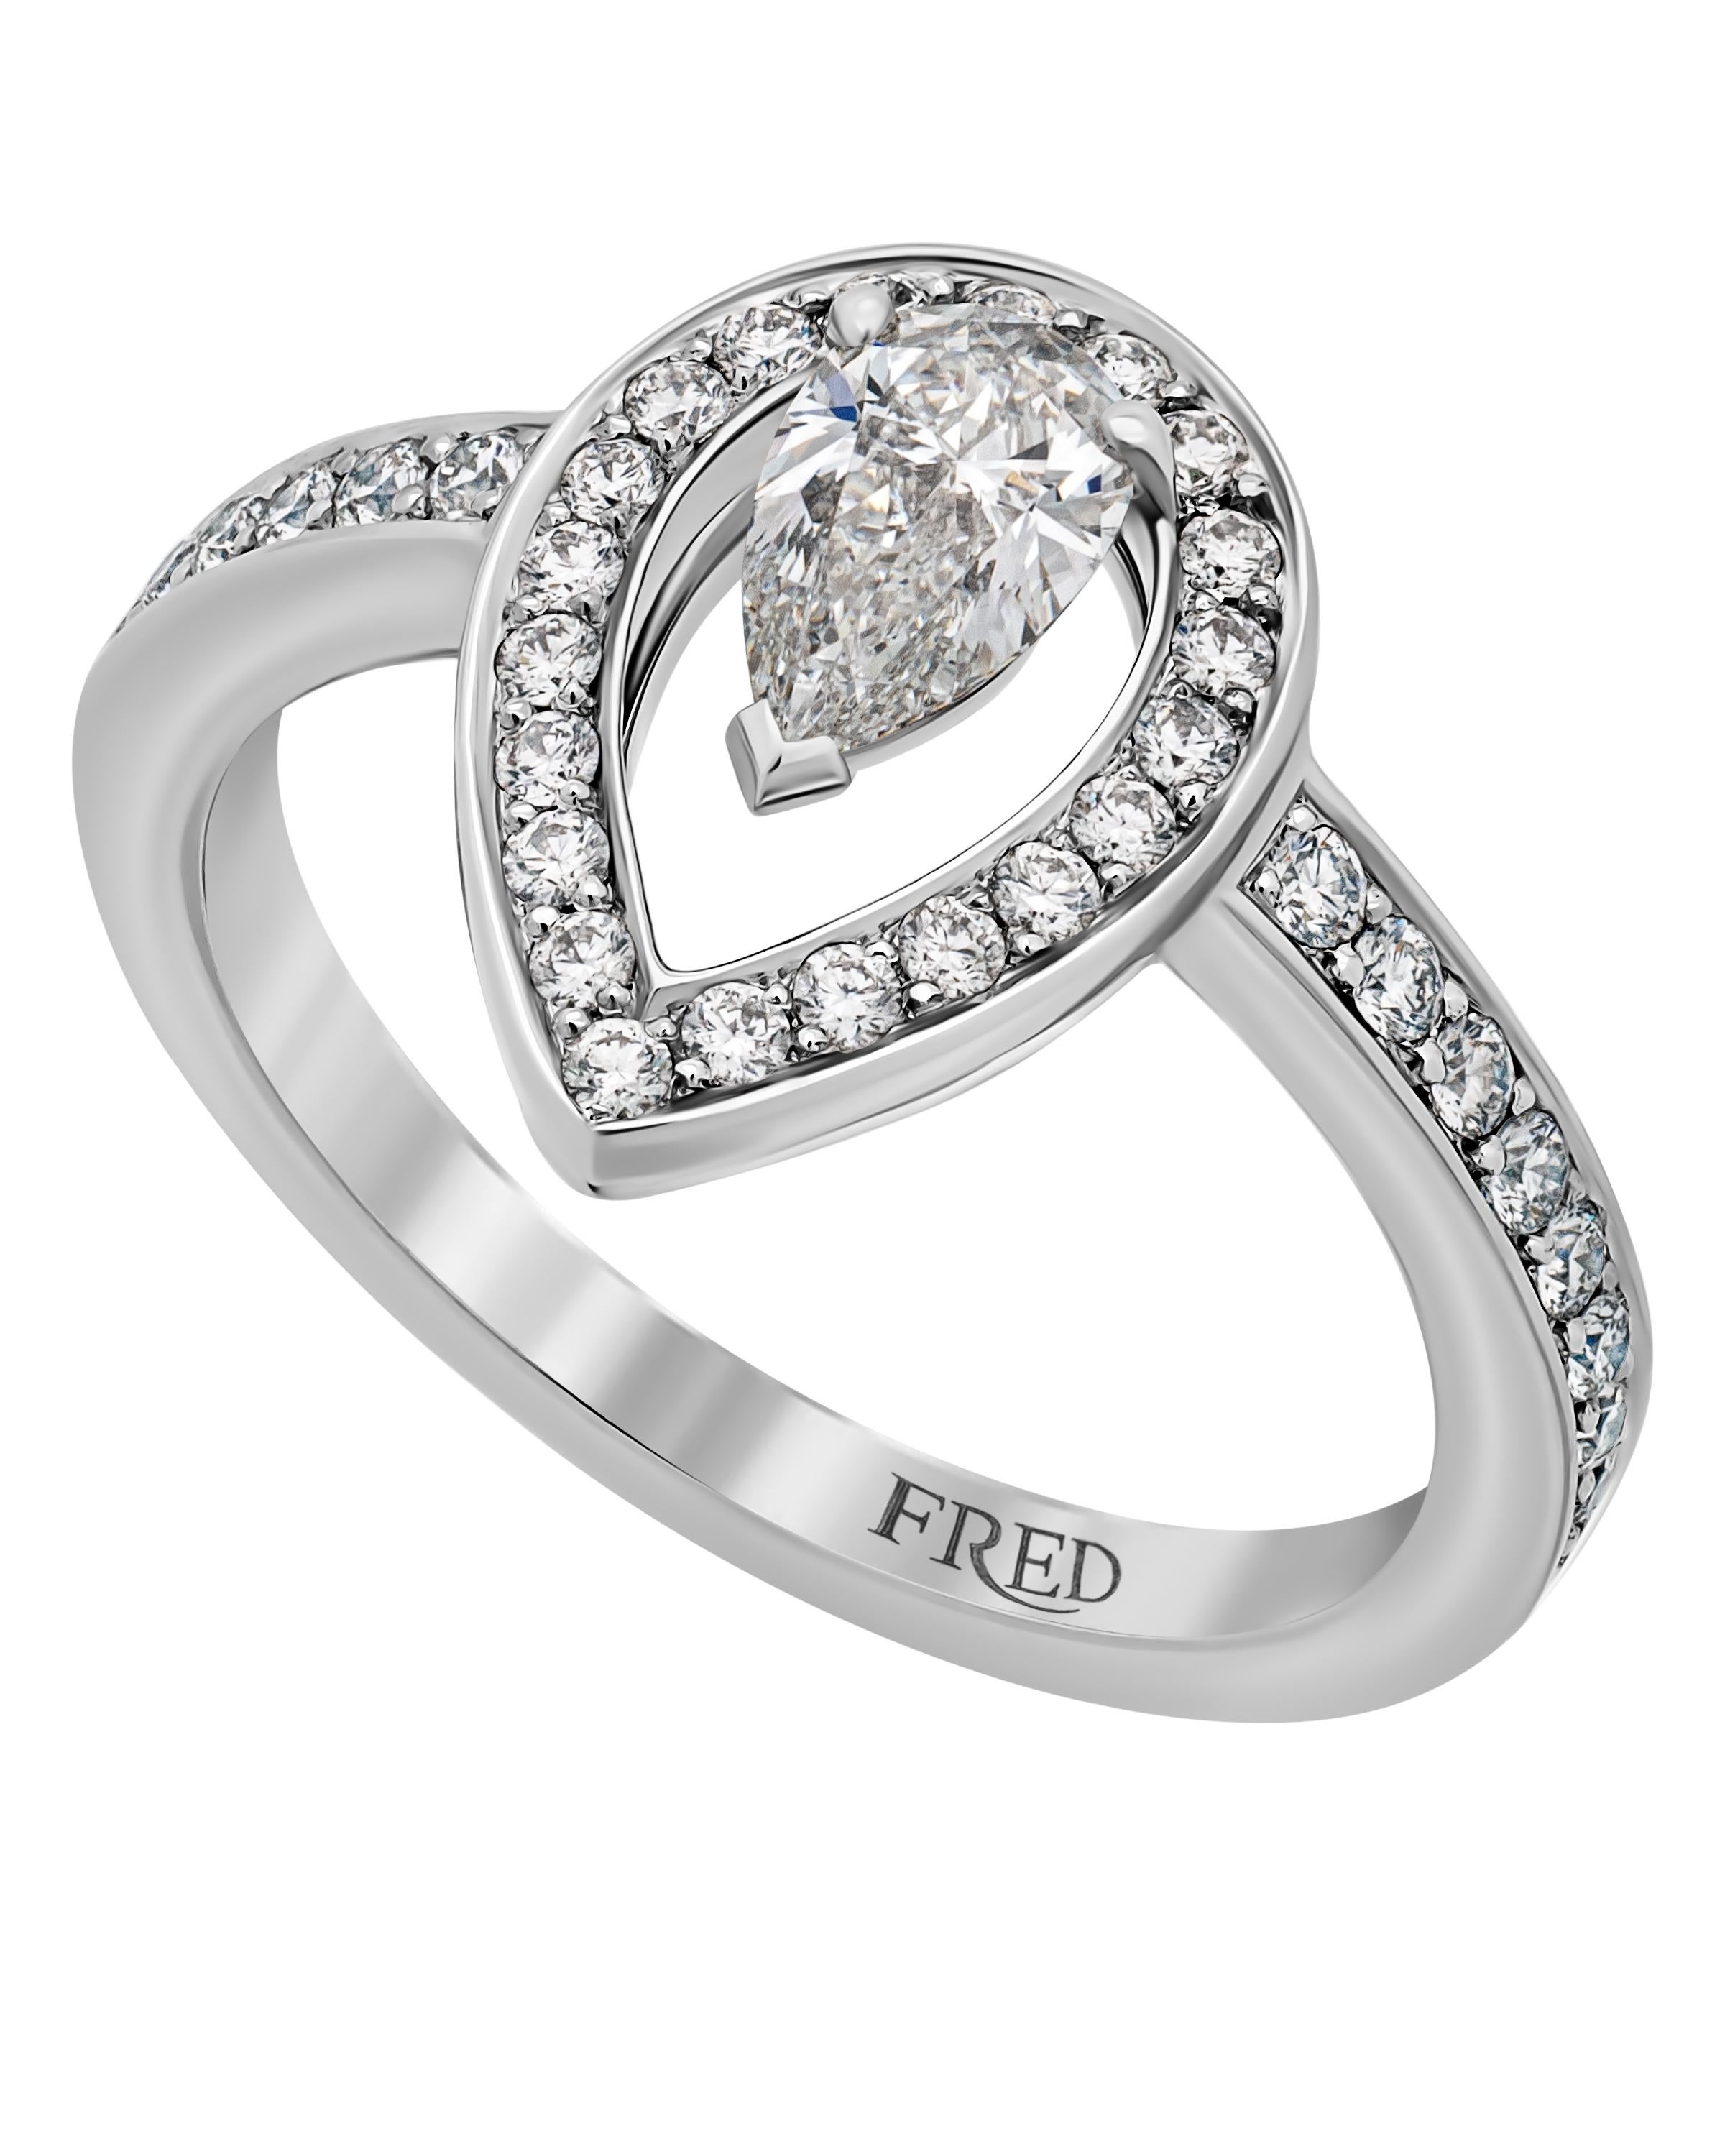 FRED Lovelight platinum engagement ring features a GIA certified pear cut 0.30ct. center diamond with color and clarity: E, VS1 adorned with 0.38ct. tw. pavé diamonds. The ring size is 5.25 (50.0). The weight is 4.13g.
